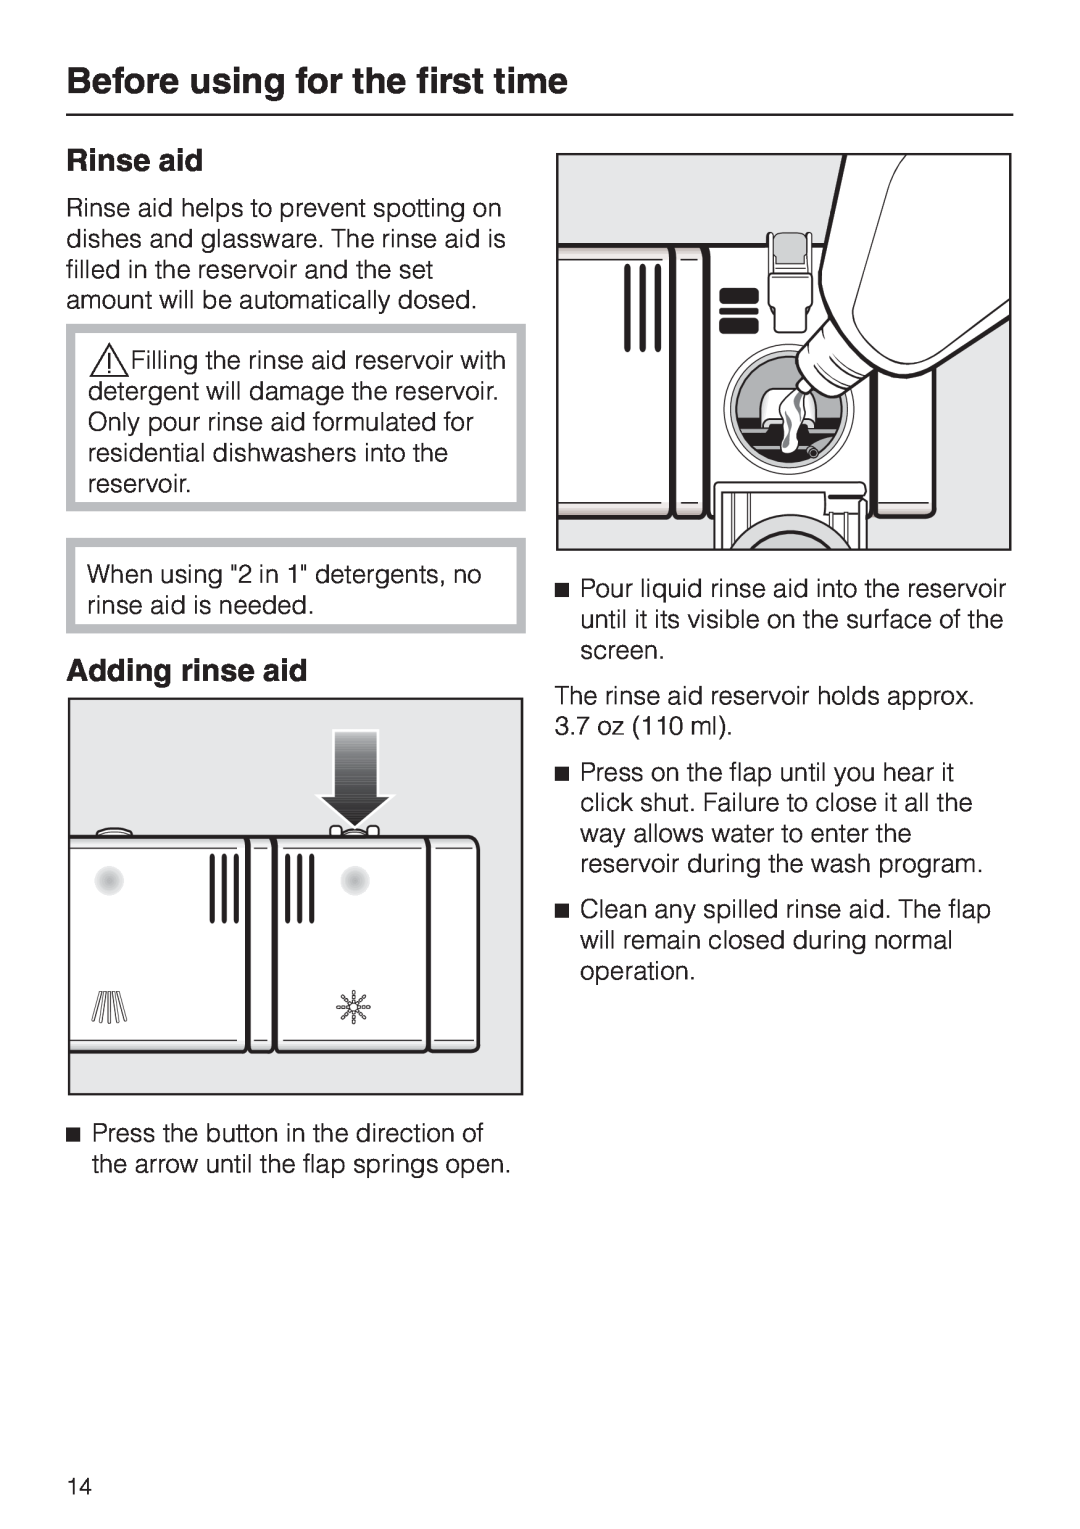 Miele G2470, G1470 operating instructions Rinse aid, Adding rinse aid, Before using for the first time 